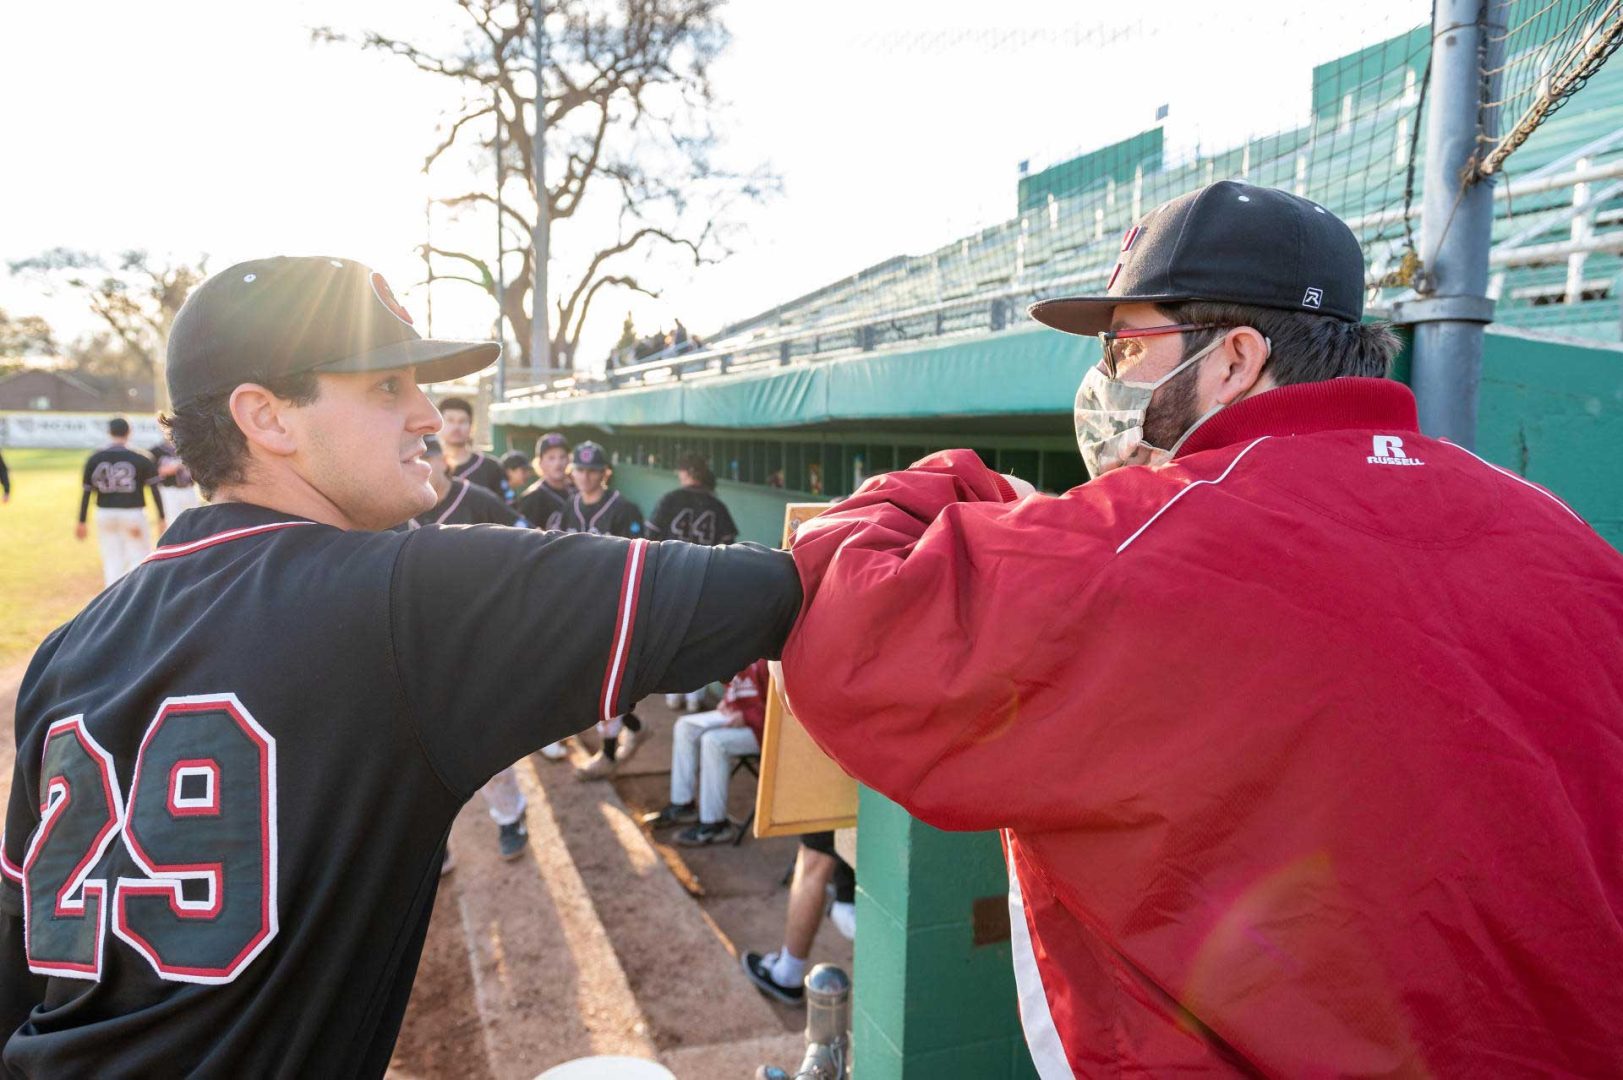 Chico State baseball player Marco Ibarra shares an elbow bump with team superfan John Brownell just outside the Wildcats dugout as the sun sets in the background.